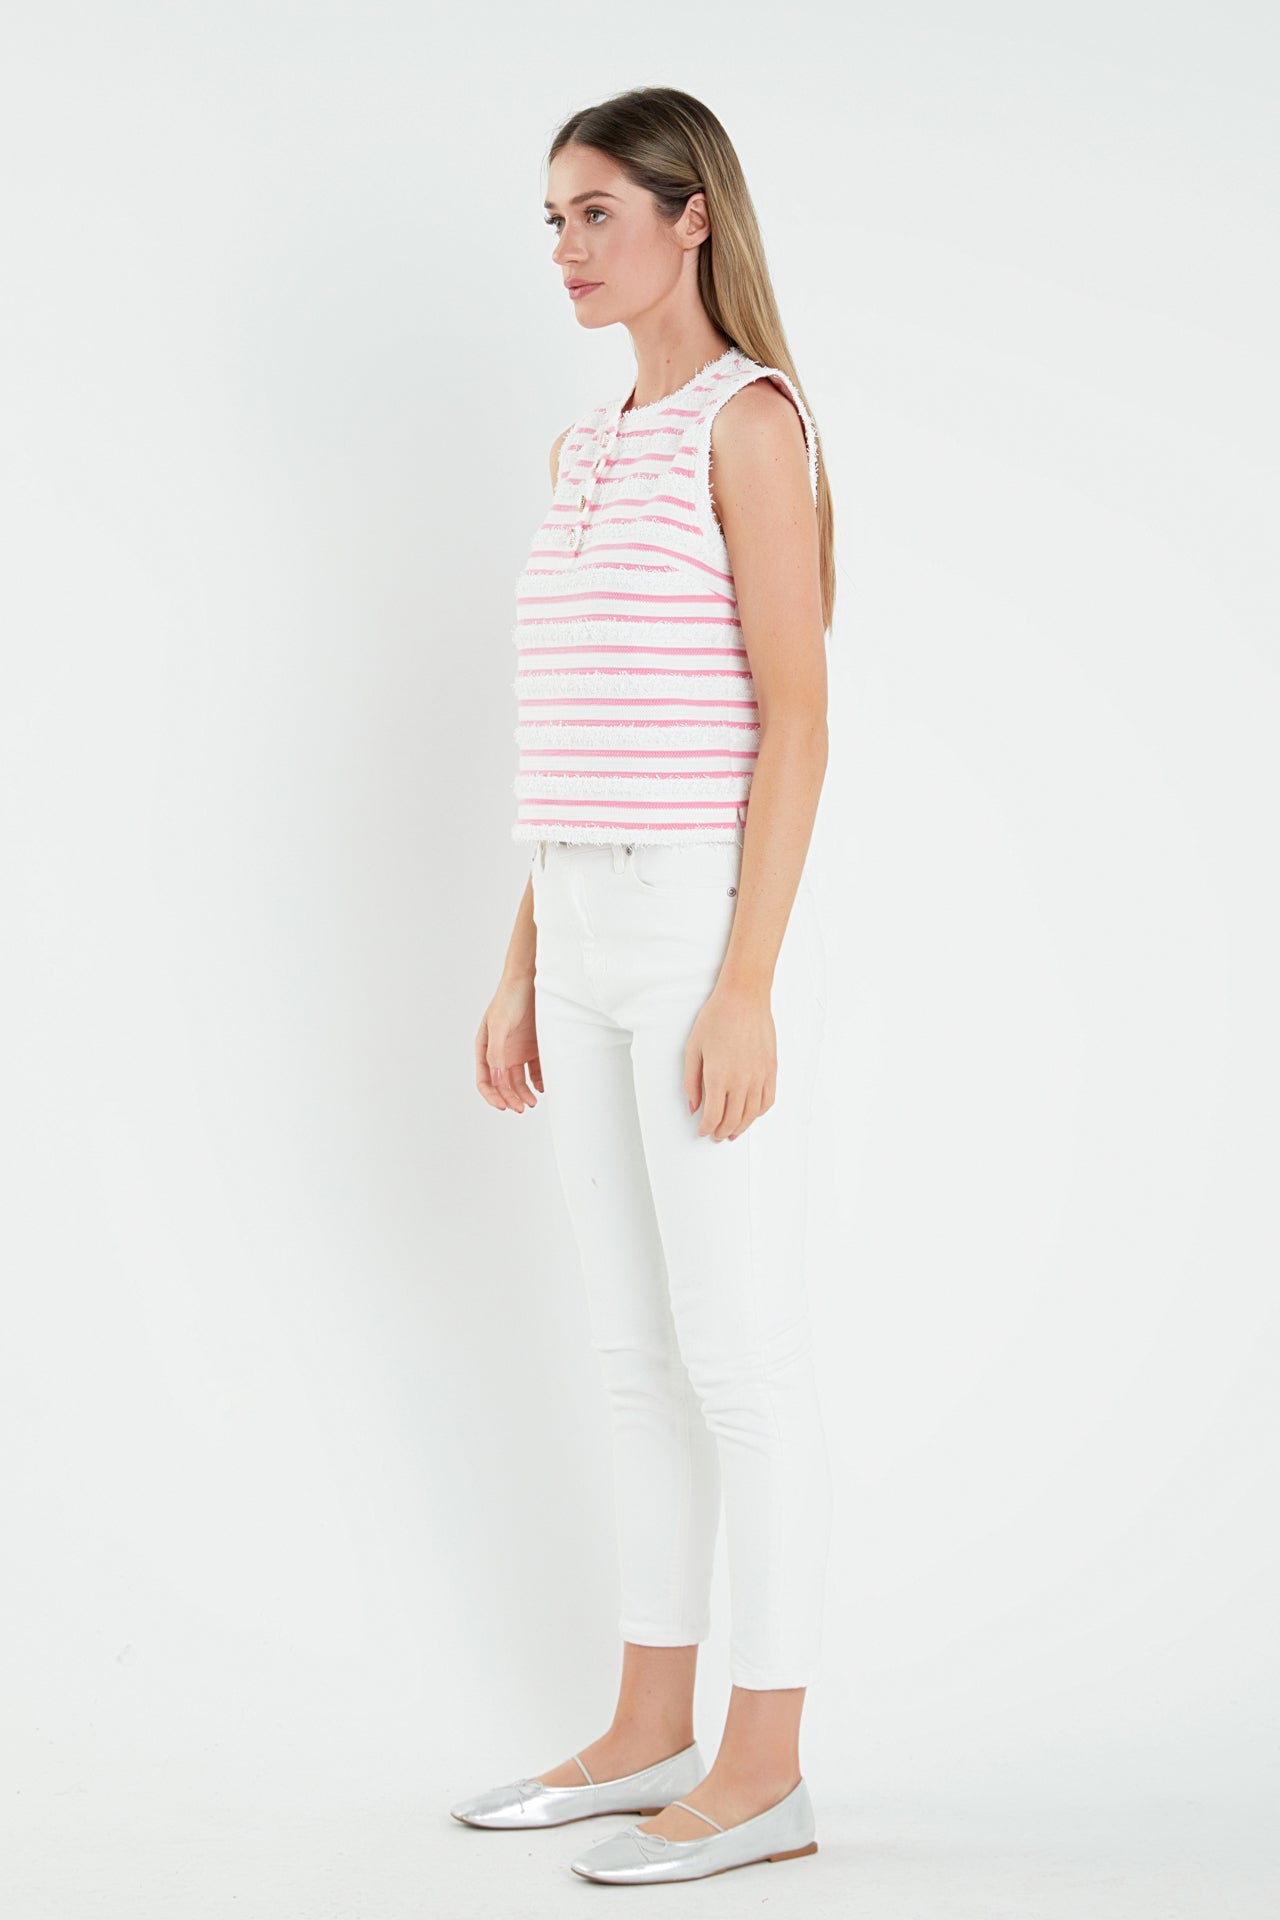 Fringed Striped Sleevless Top